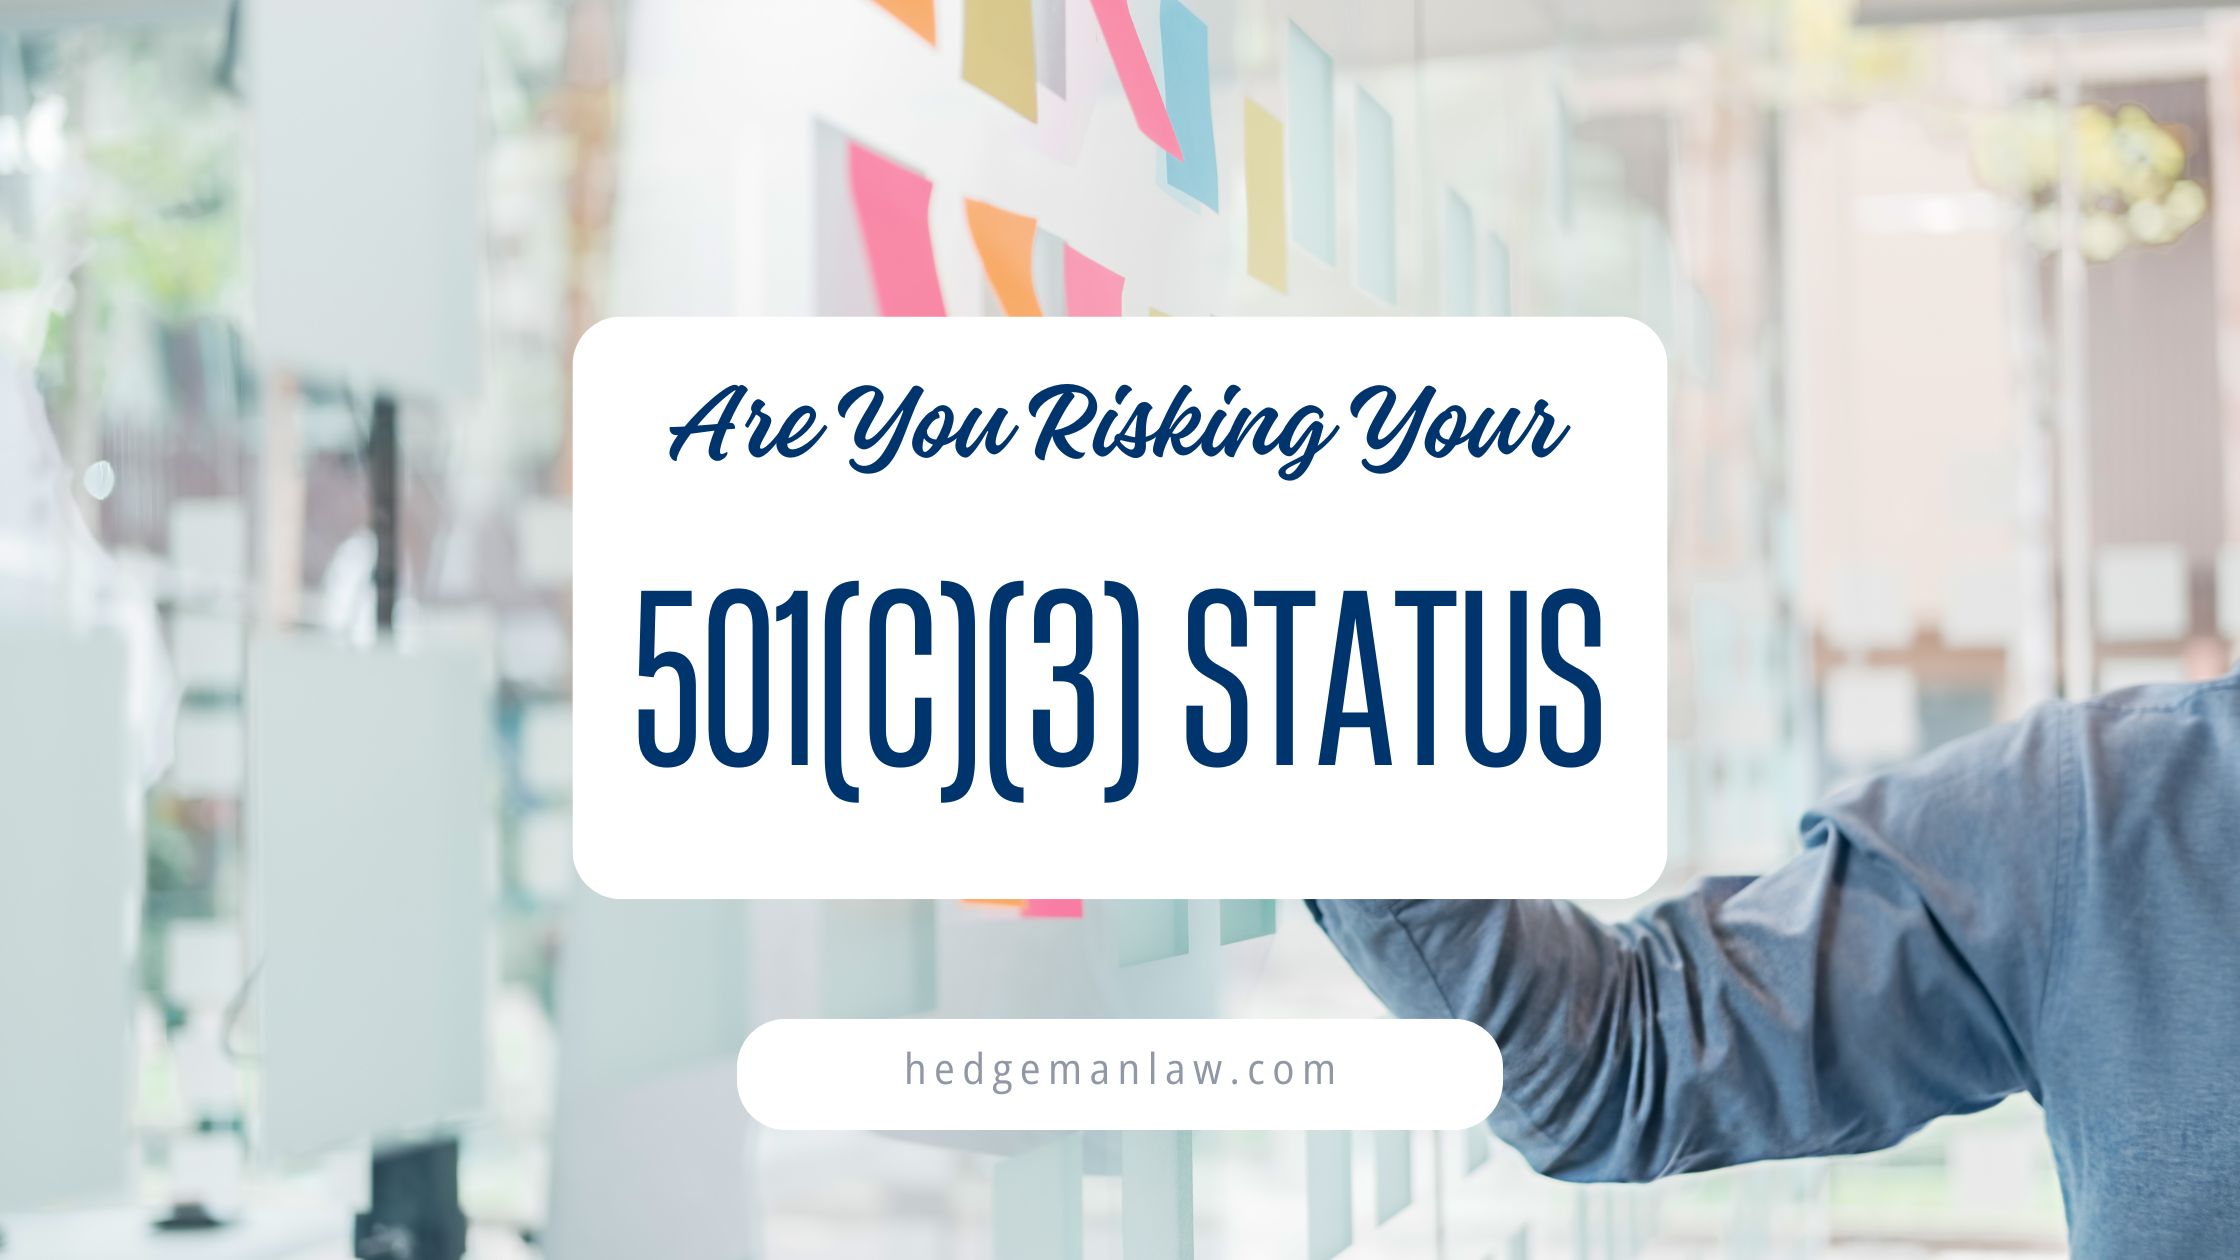 Are You Risking Your 501(c)(3) Status